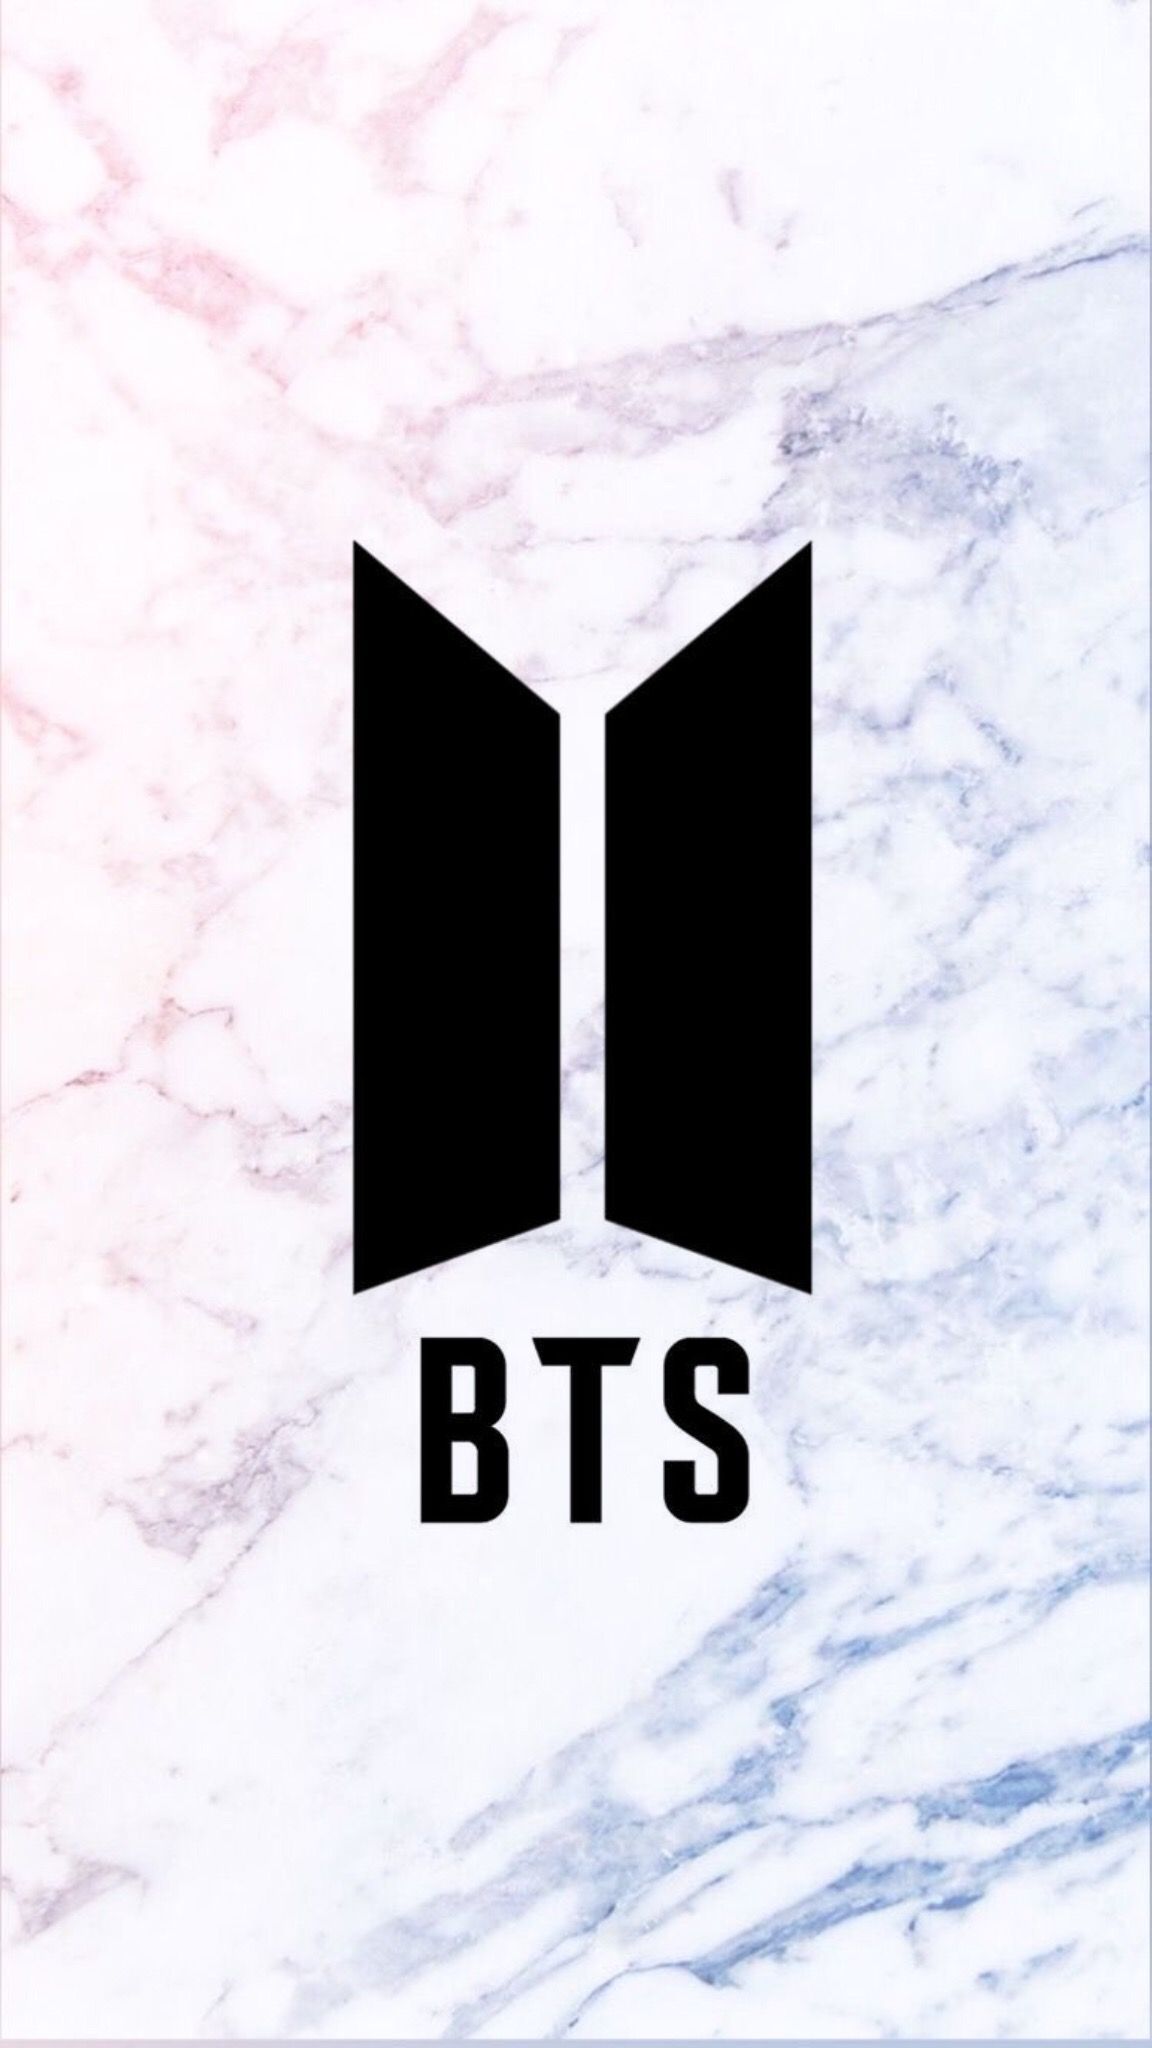 Featured image of post Bts Logo Wallpaper Black Bts wallpapers 4k hd for desktop iphone pc laptop computer android phone smartphone imac macbook tablet mobile device